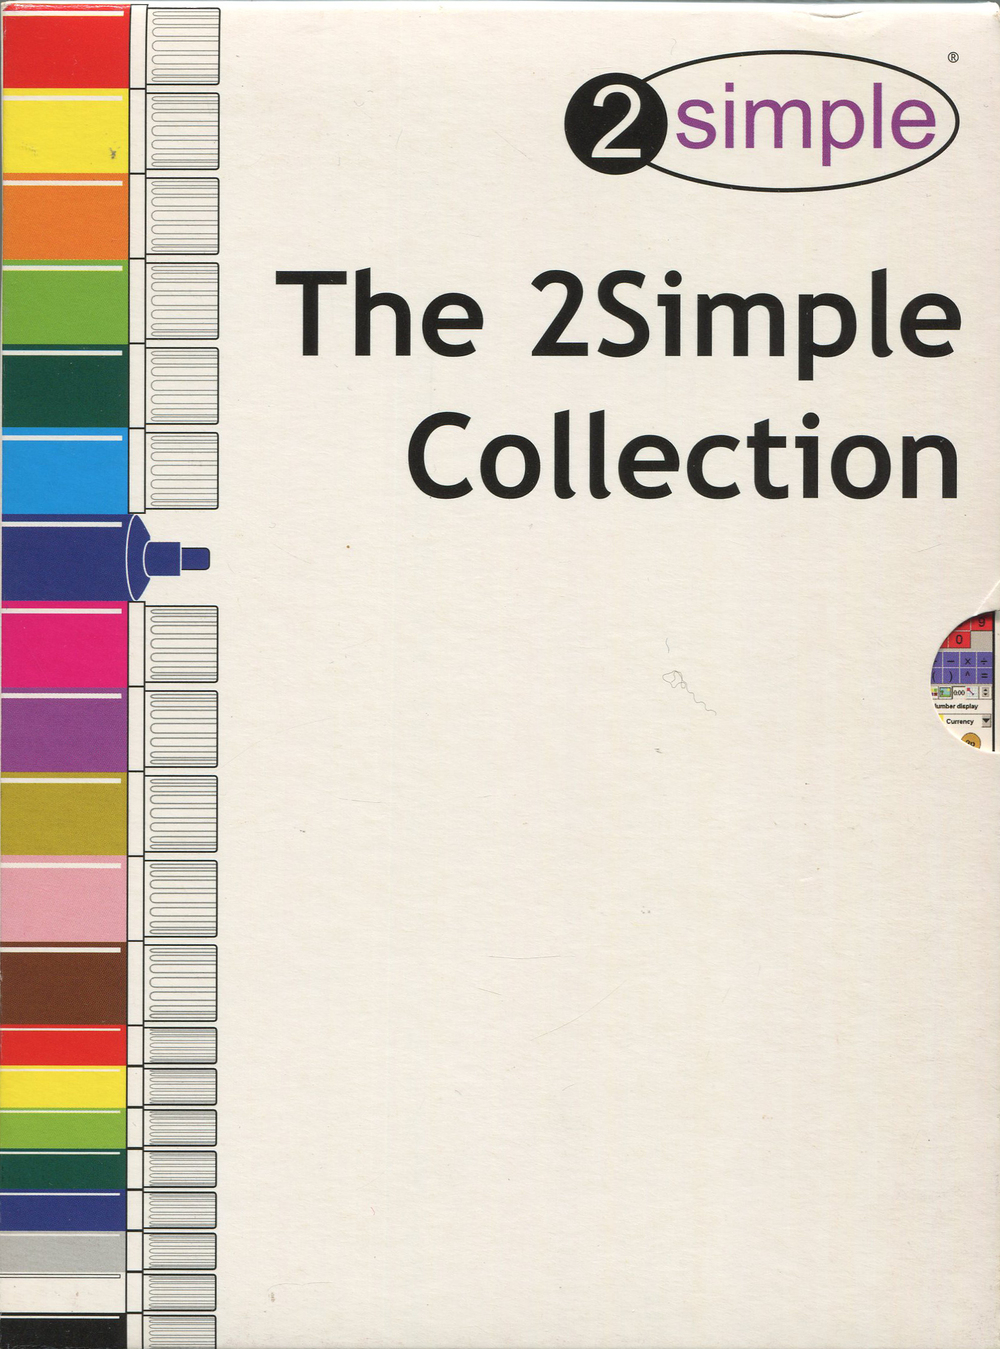 2simple software the collection download